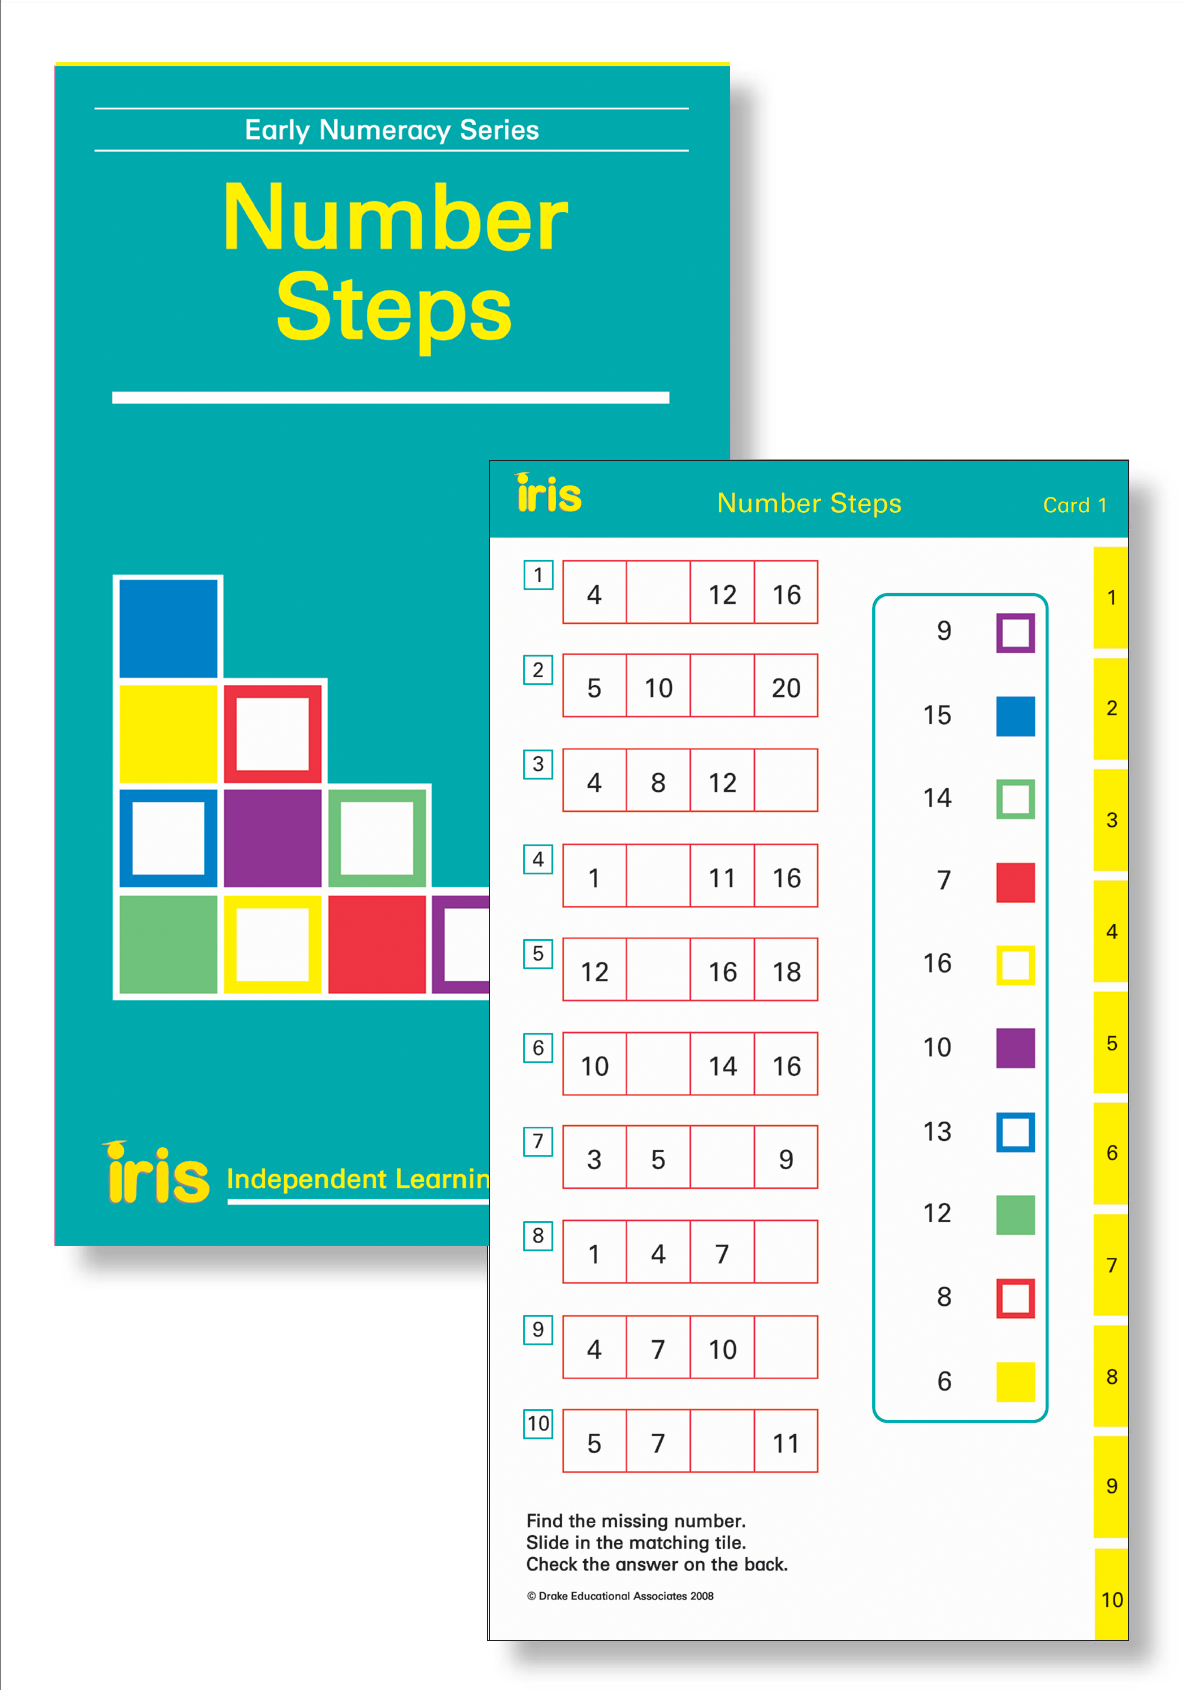 Iris Study Cards: Early Numeracy Year 2 - Number Steps